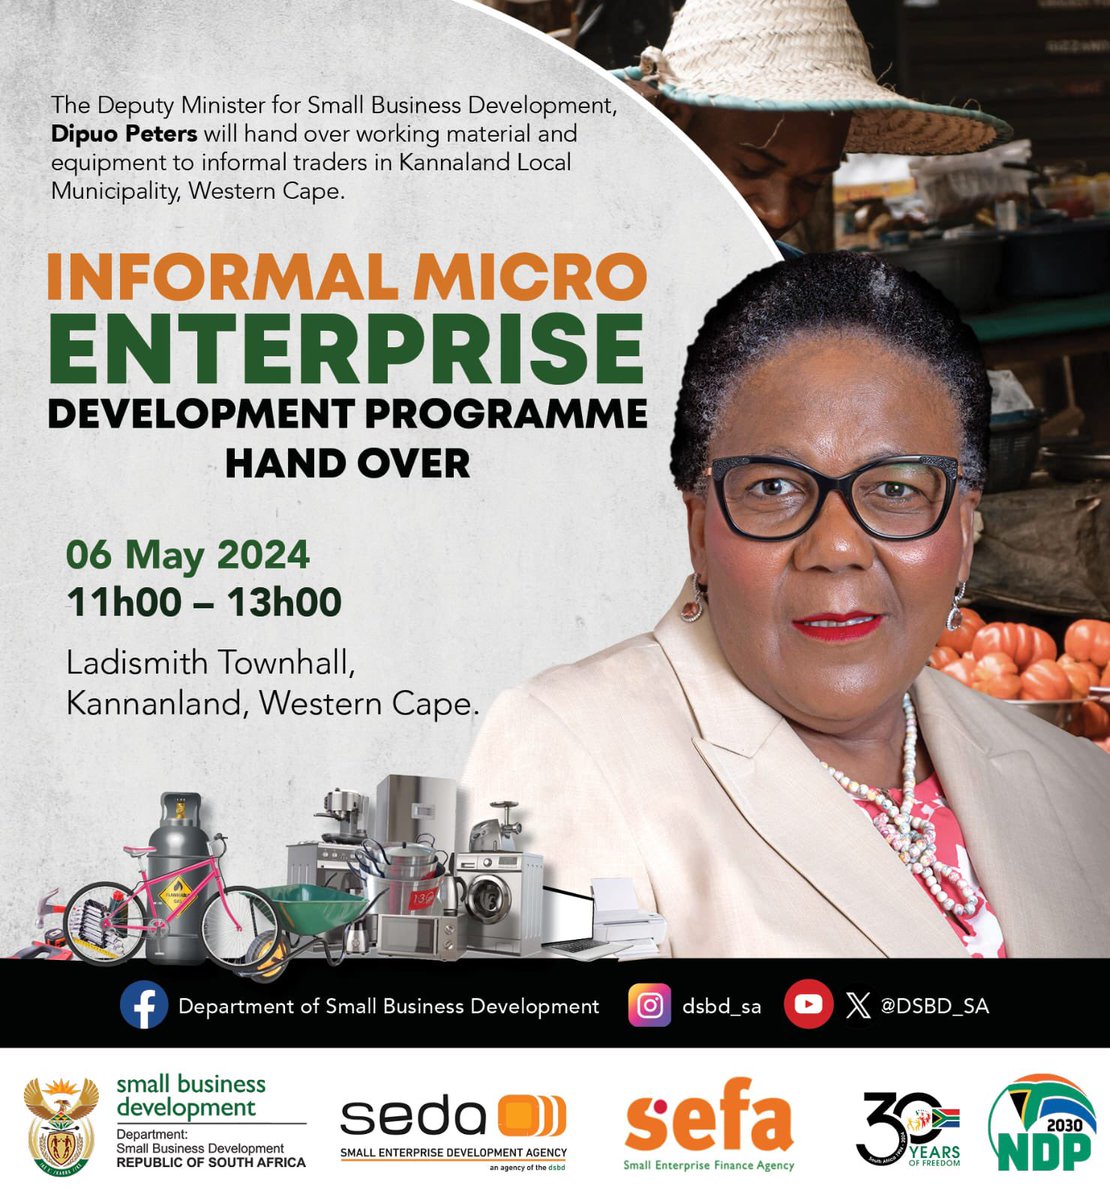 Deputy Minister for Small Business Development, Ms Dipuo Peters will hand over working material and equipment to informal traders in Kannanland Local Municipality, Western Cape province. #IMEDP #DSBDUpliftingInformalSMMEs